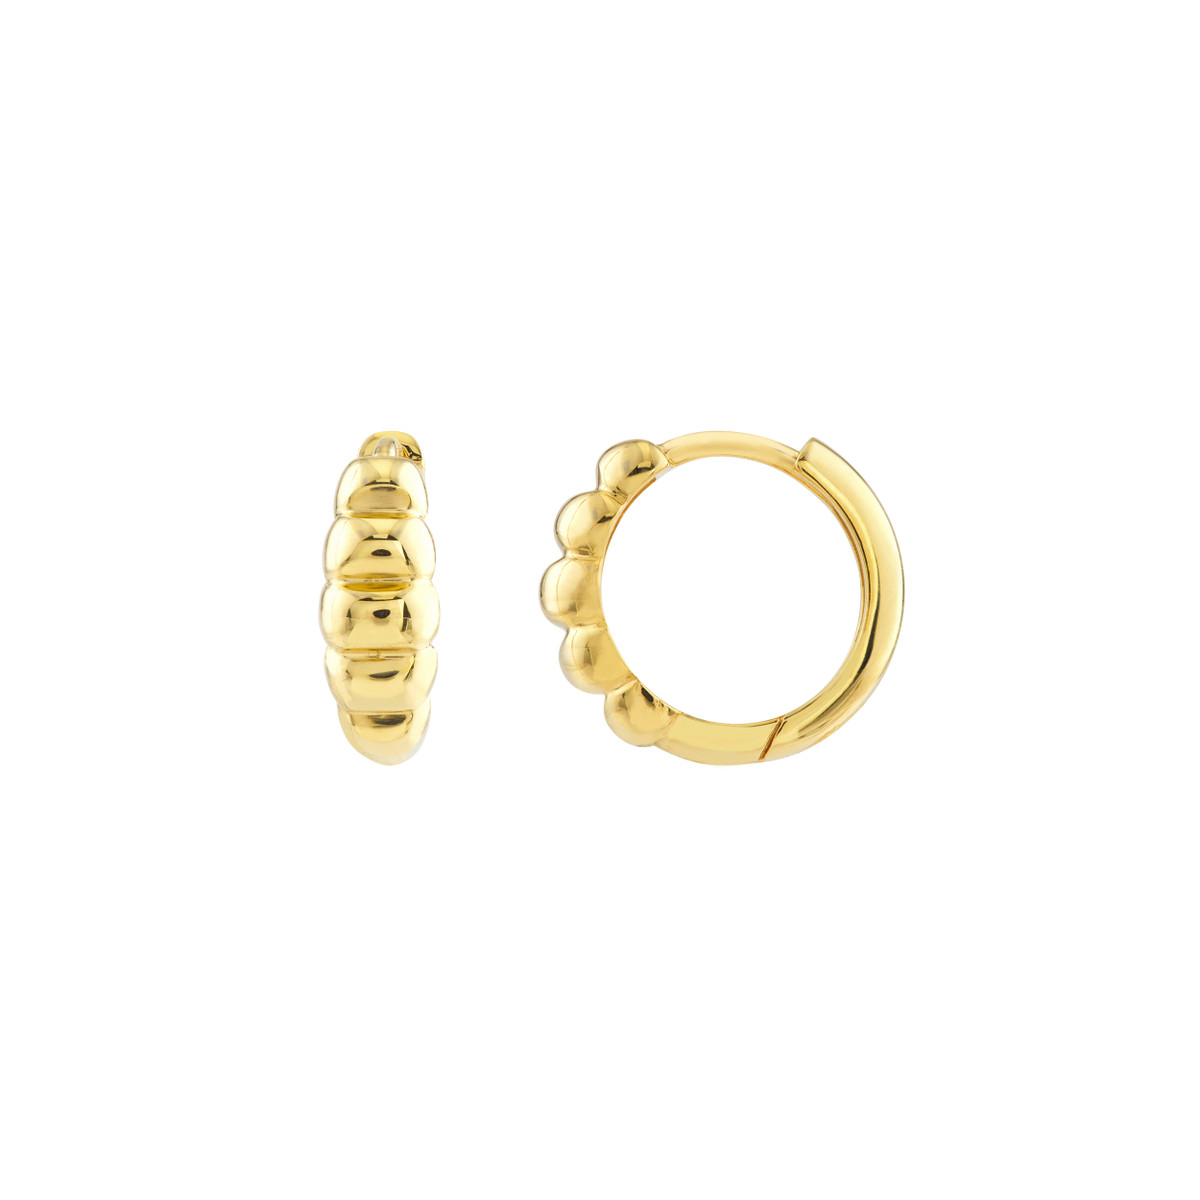 Korman Signature 14kt Yellow Gold Puffy Polished Hoops